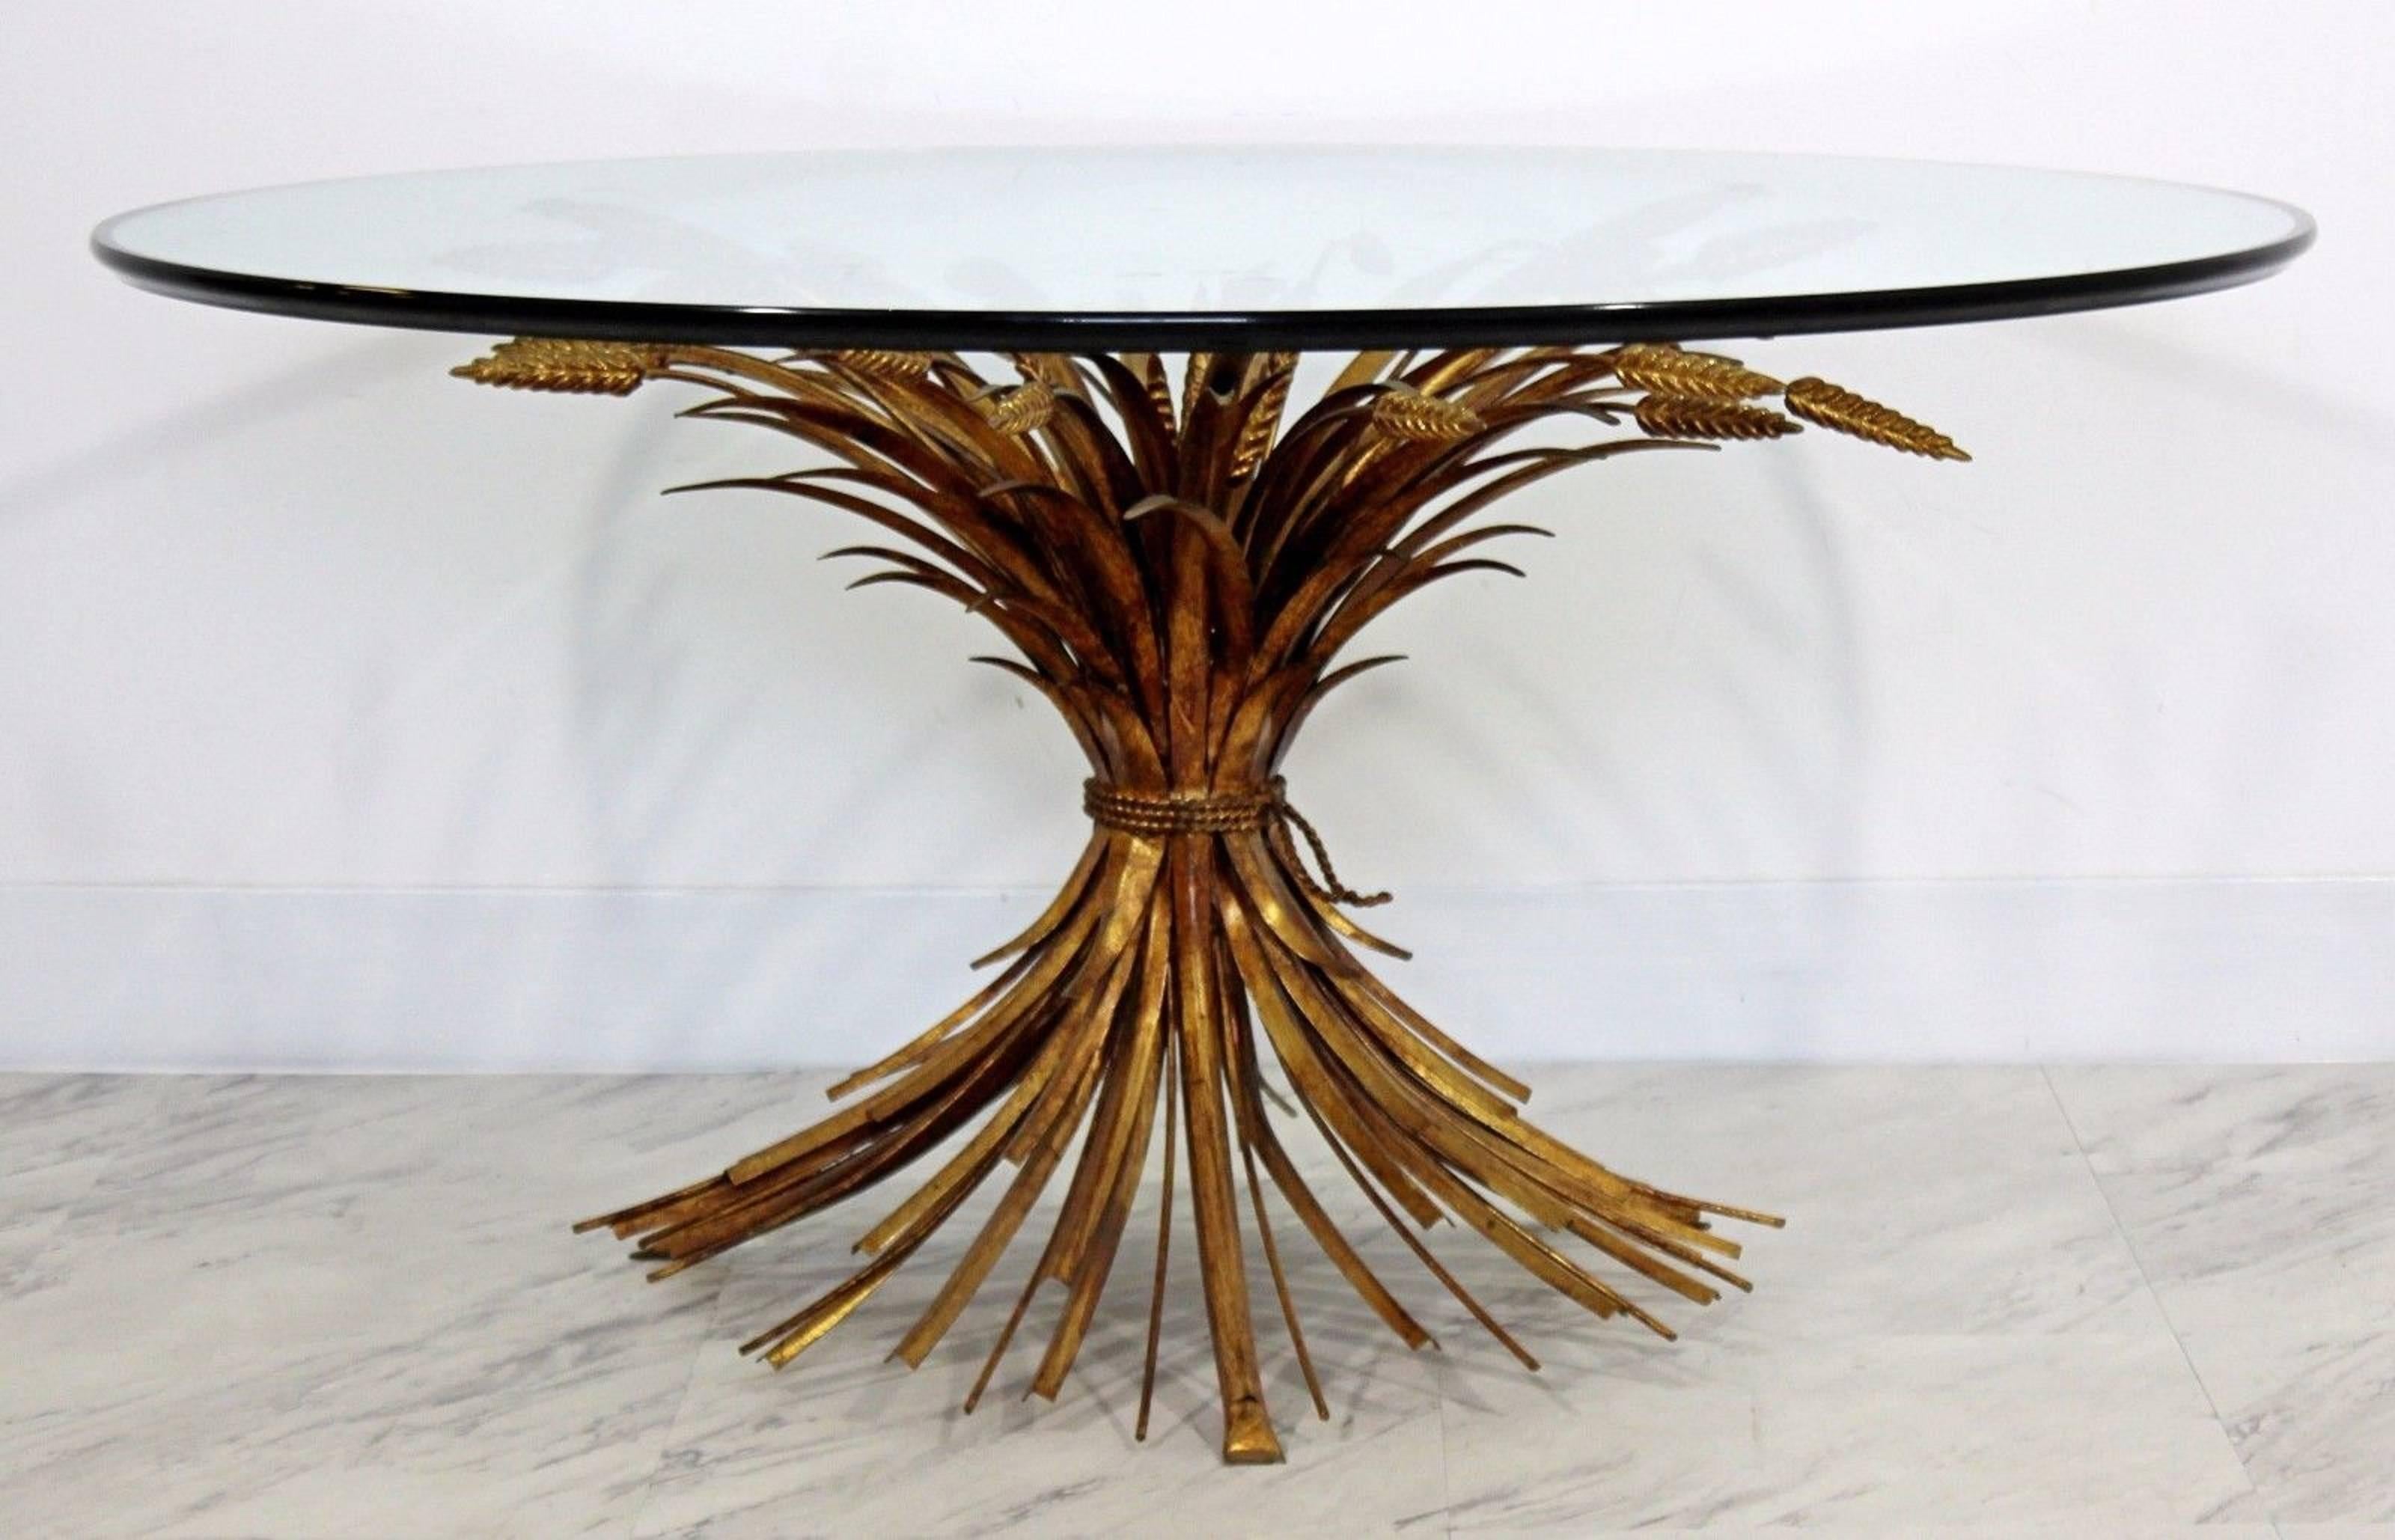 For your consideration is a lovely Italian gold gilt Hollywood Regency wheat sheaf, coffee table, with a round, glass top. In excellent condition. The dimensions are 36